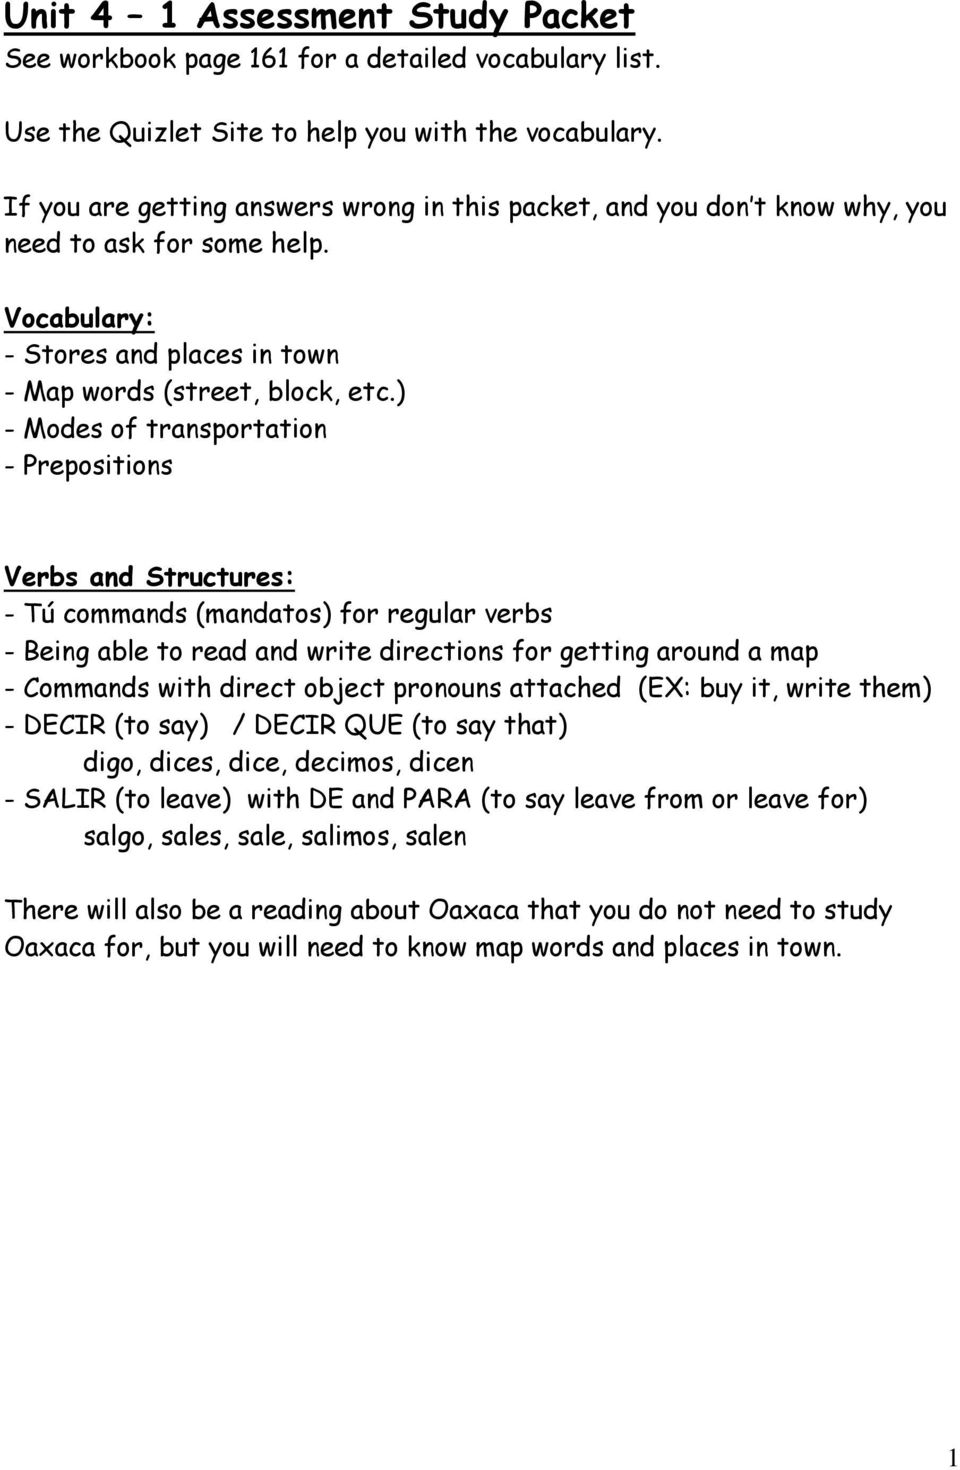 ) - Modes of transportation - Prepositions Verbs and Structures: - Tú commands (mandatos) for regular verbs - Being able to read and write directions for getting around a map - Commands with direct